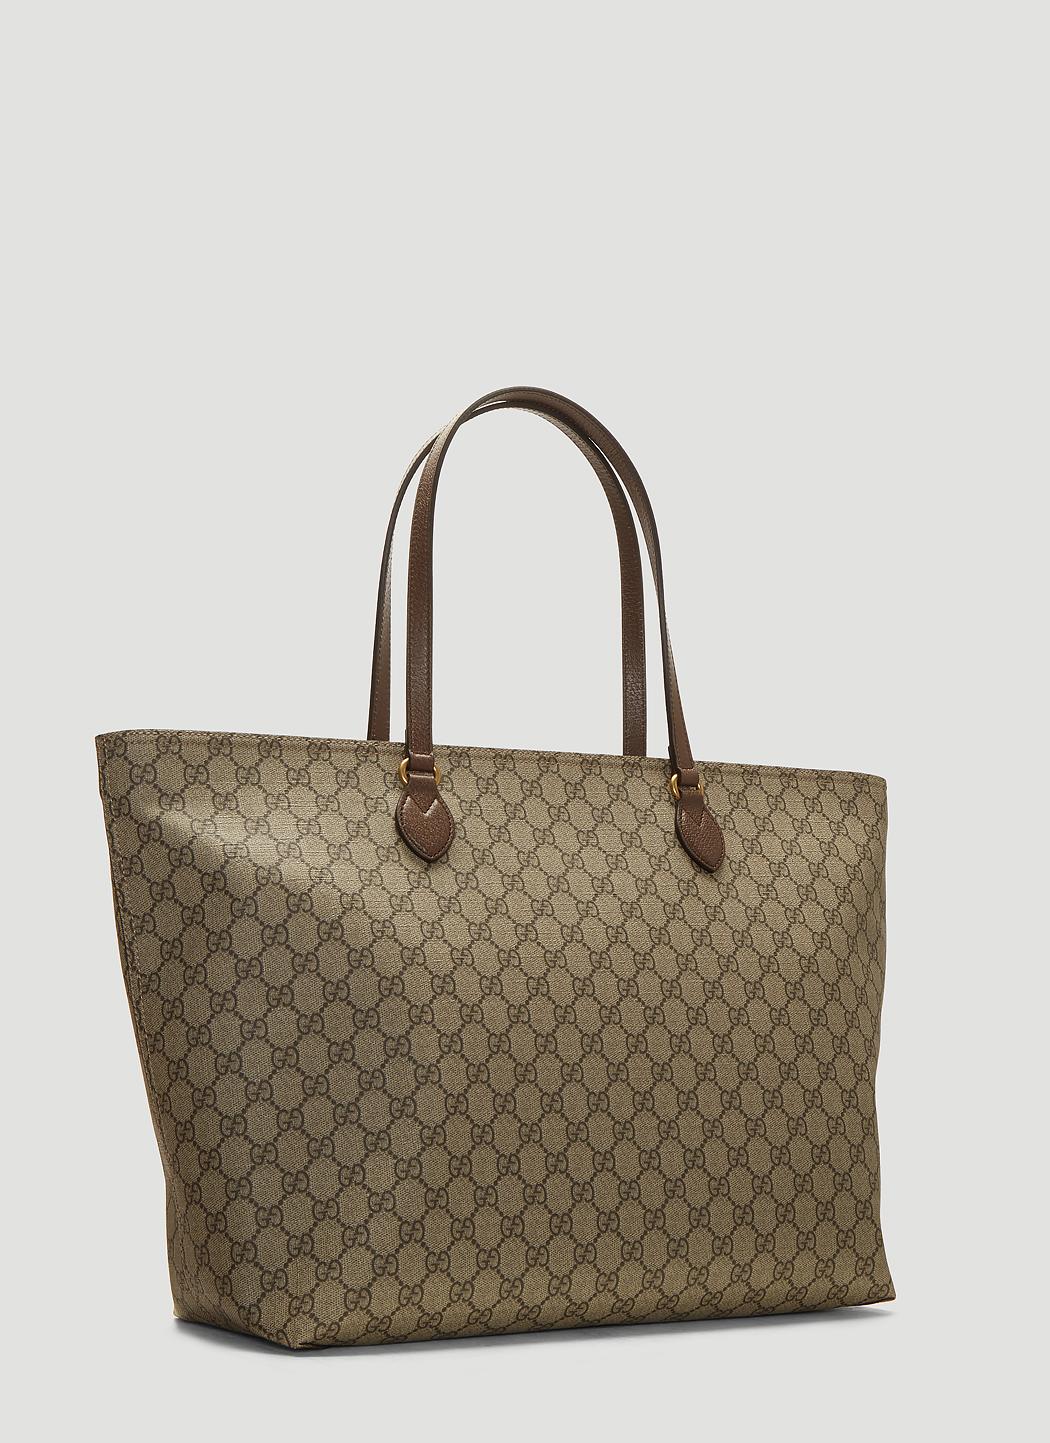 Gucci Canvas Ophidia GG Supreme Tote Bag In Beige in Natural - Lyst